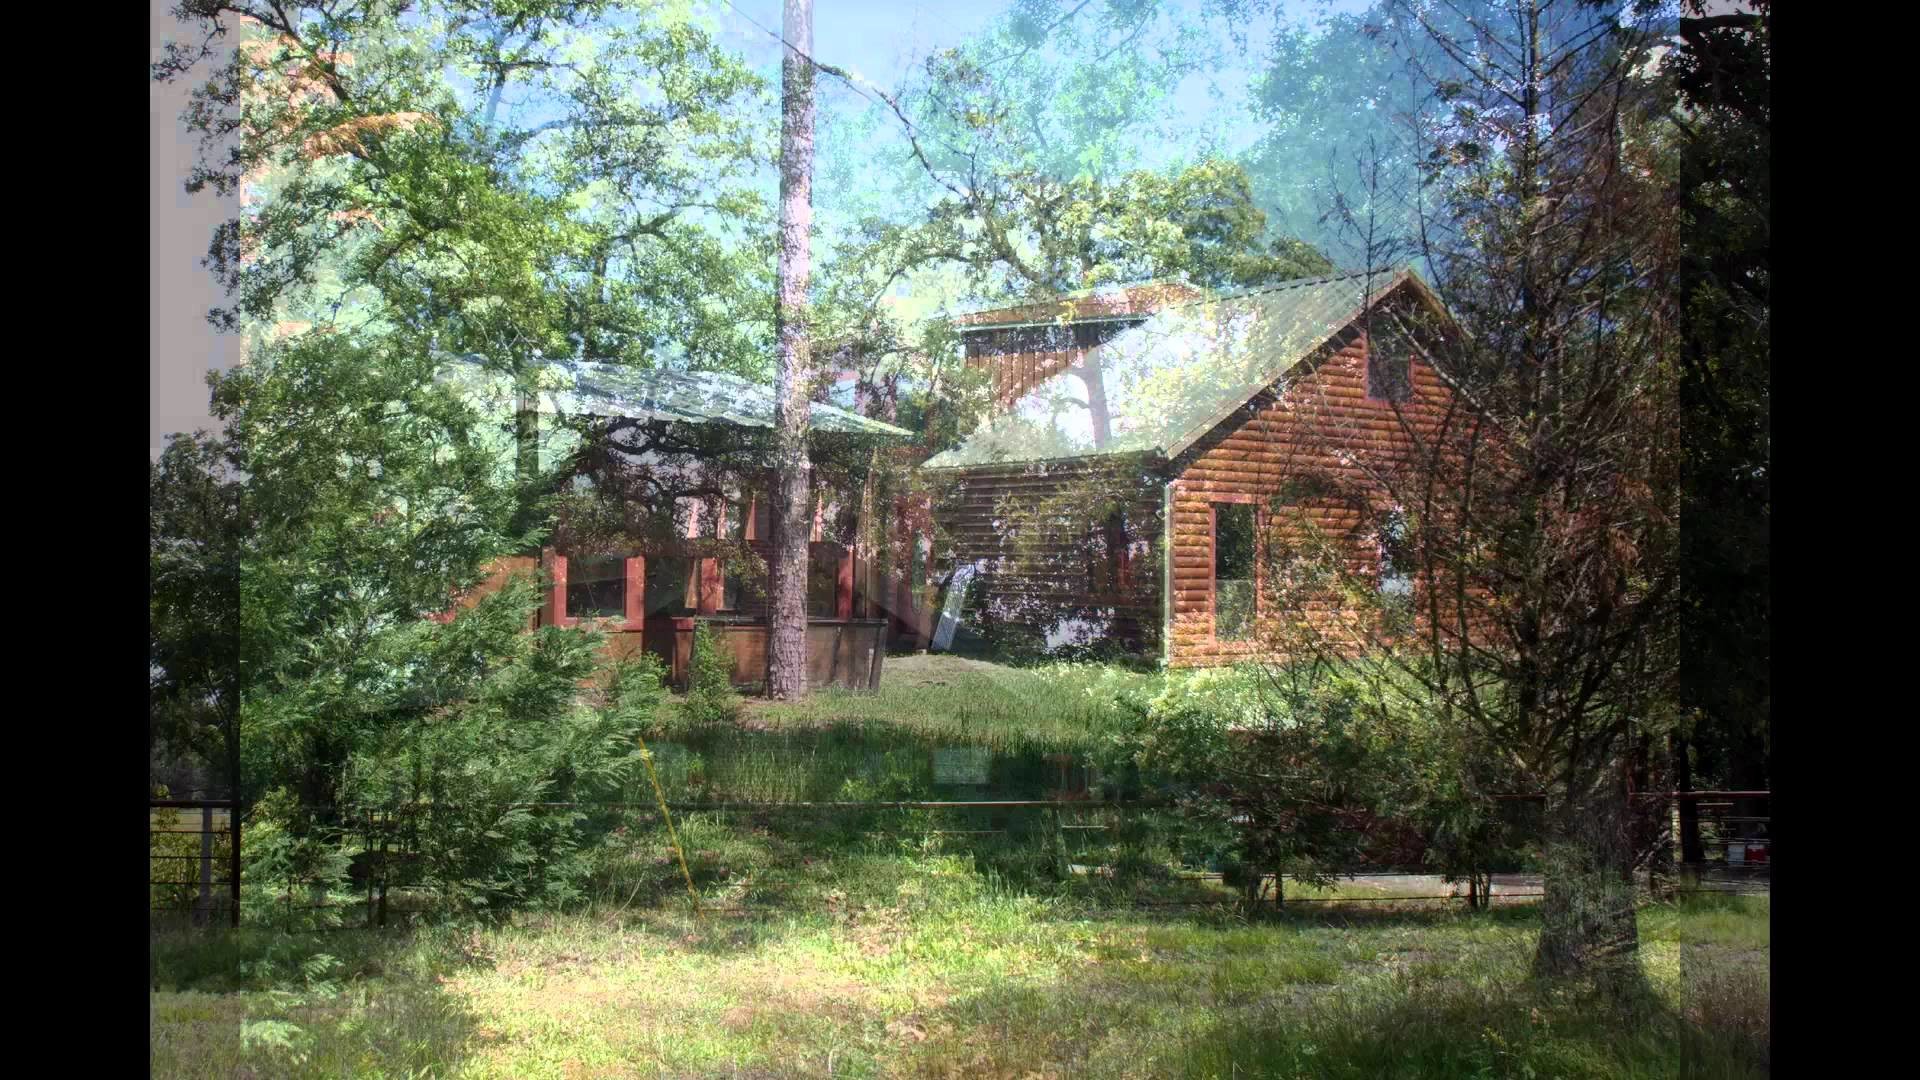 1920x1080 East Texas Ranch For Sale - FM 2869 Winnsboro, TX - Perfect For Family or  Weekend Home